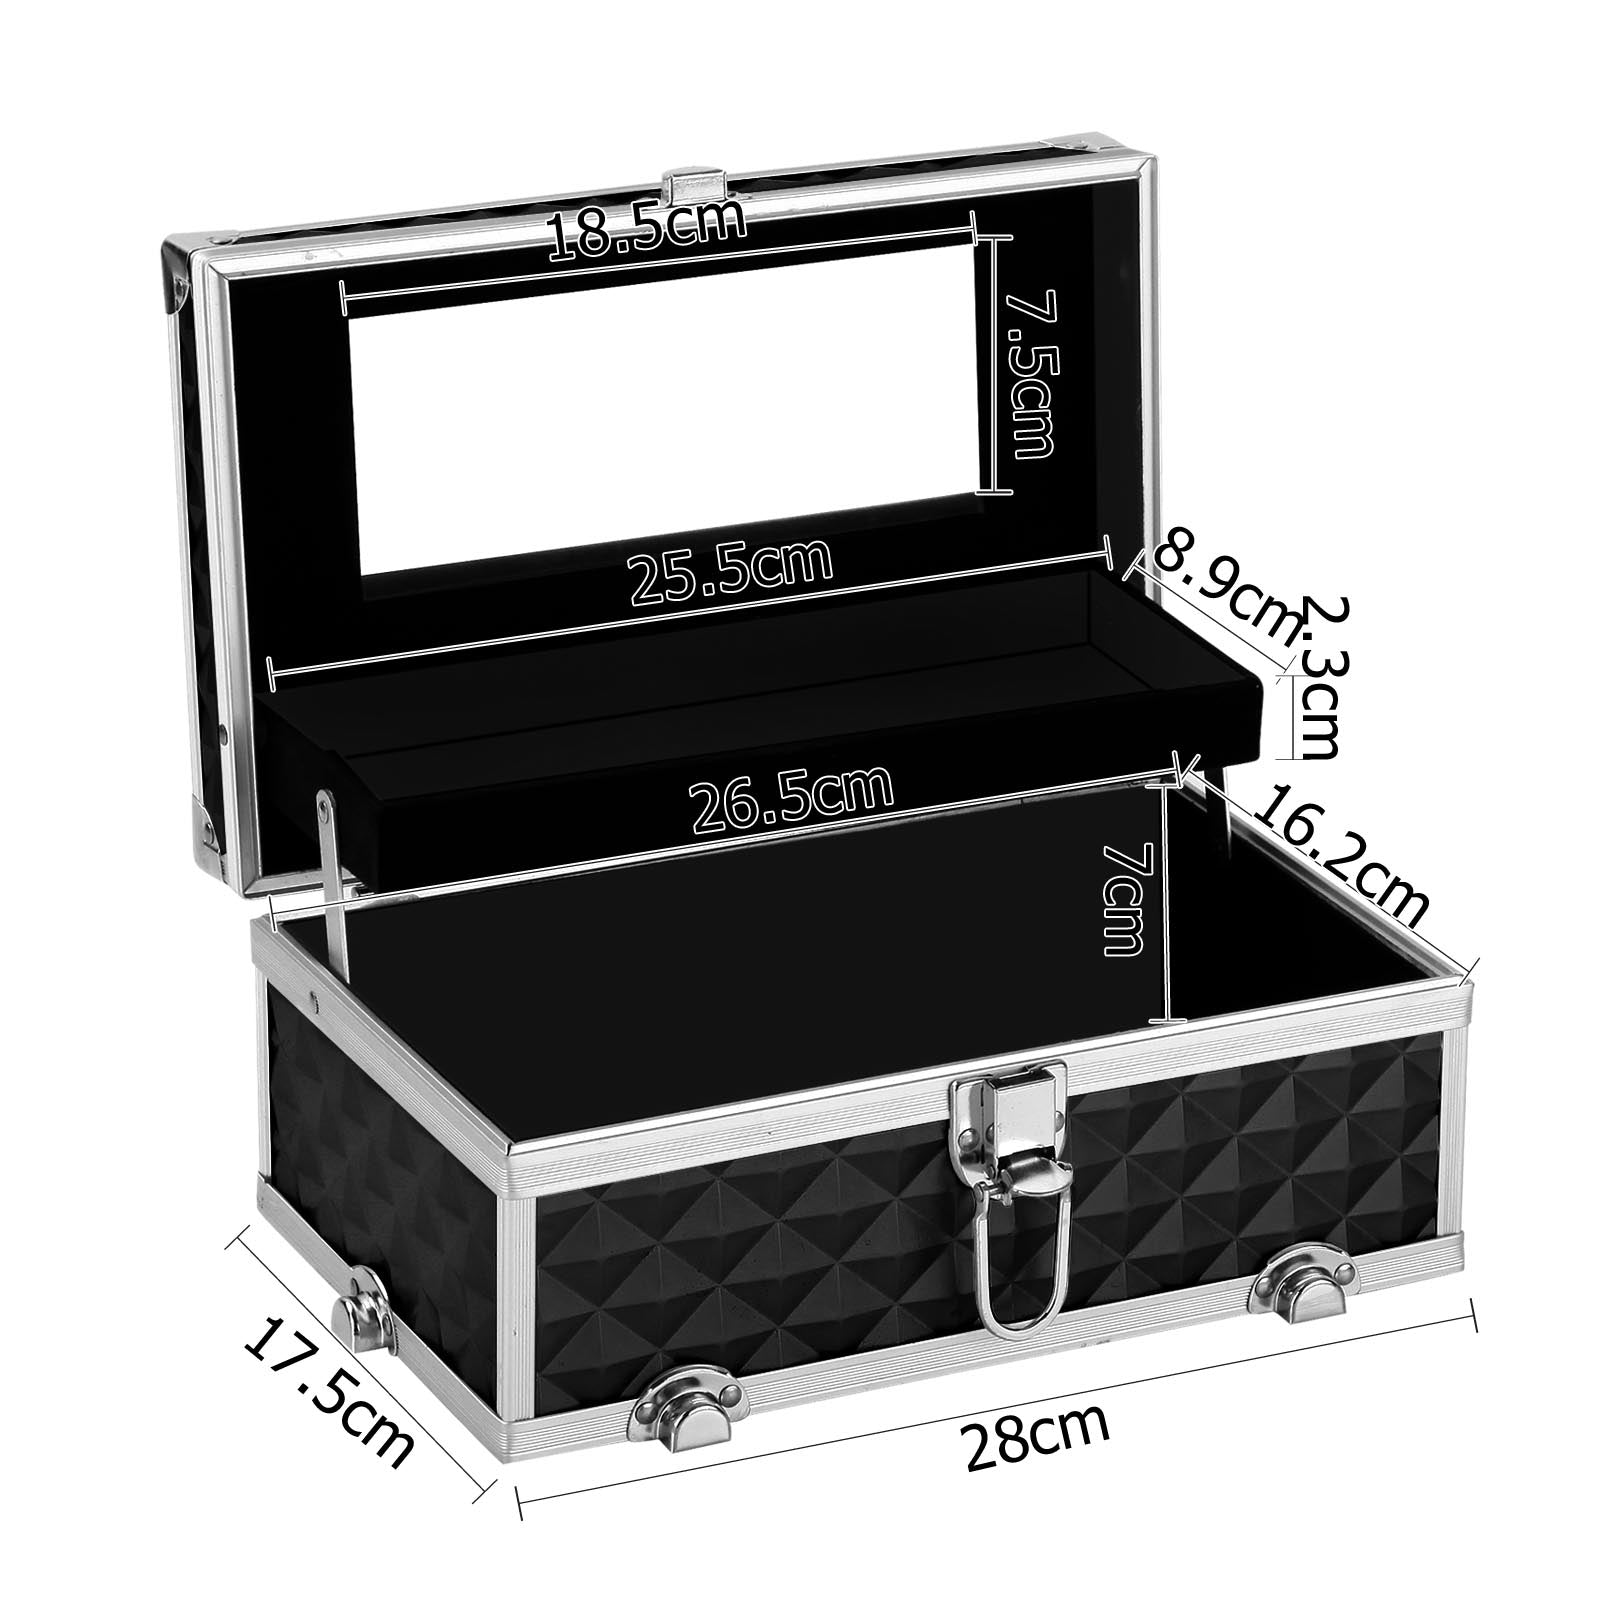 Buy Portable Cosmetic Beauty Makeup Carry Case with Mirror - Diamond Black Online Australia at BargainTown